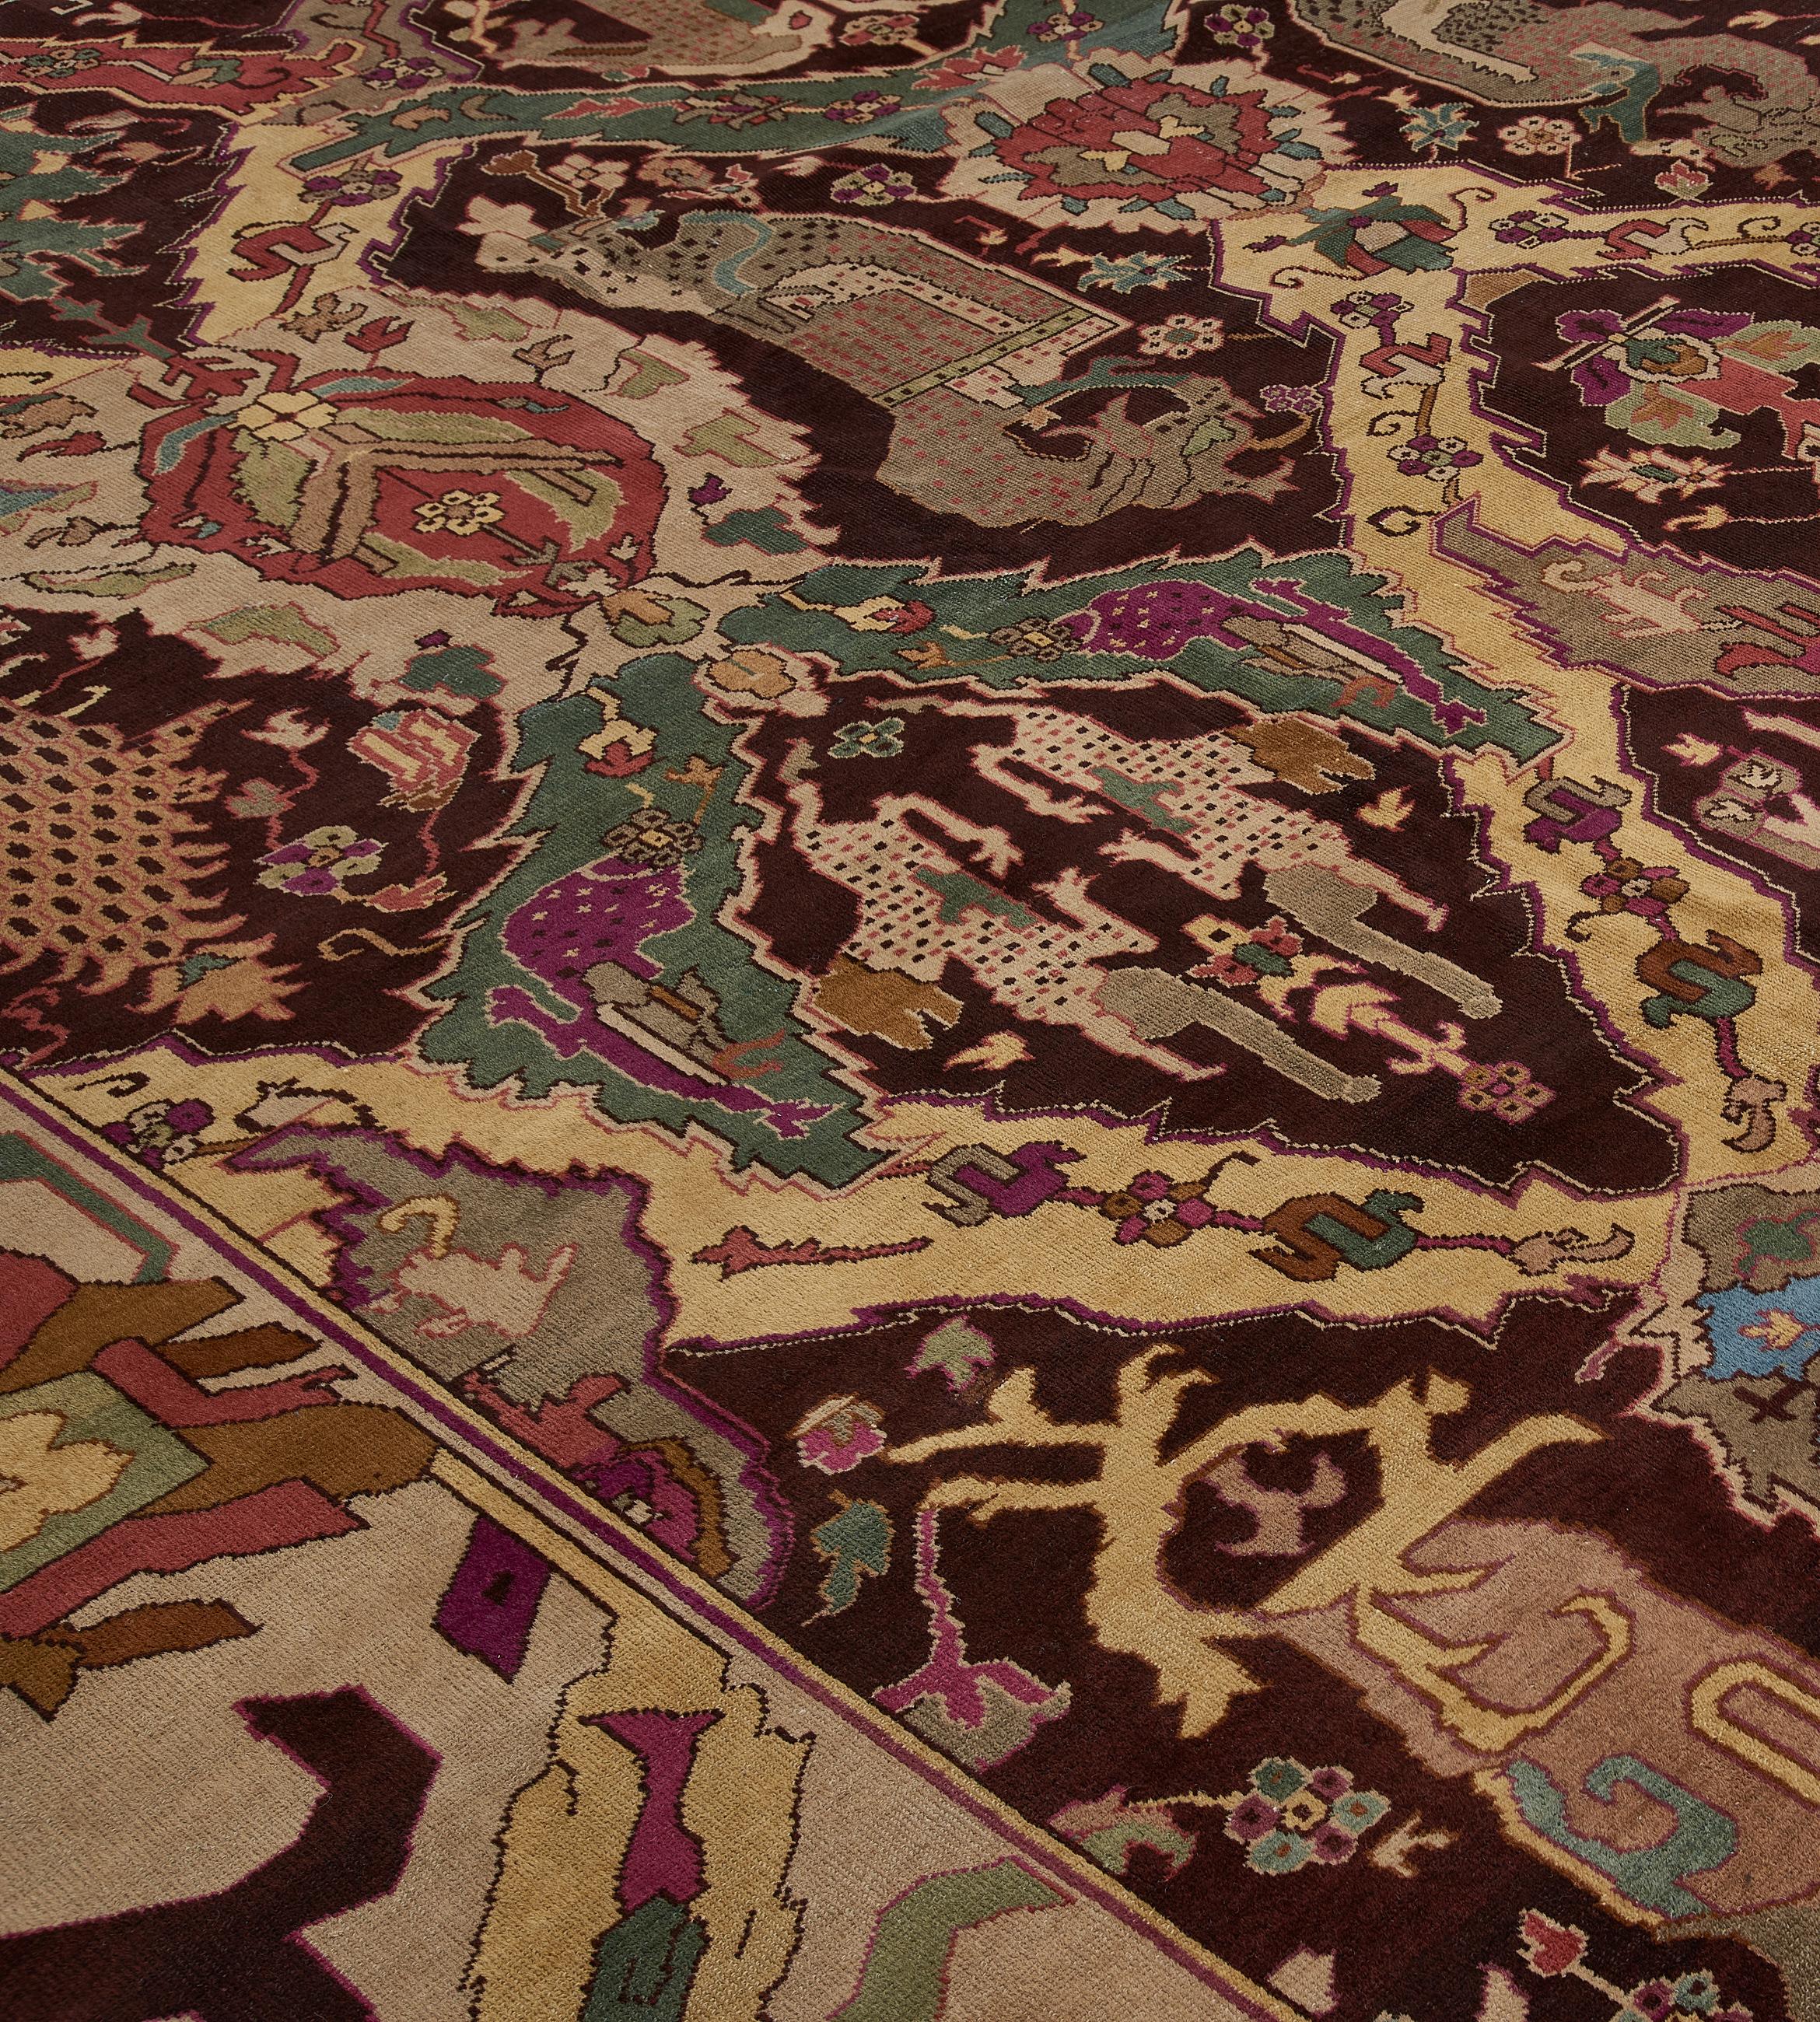 This antique, circa-1920, Indian rug has a chocolate-brown field with three bold polychrome columns of linked lozenges alternating with palmettes each with a palmette or a stylised dragon motif together with floral stems and flowerheads, in a bold